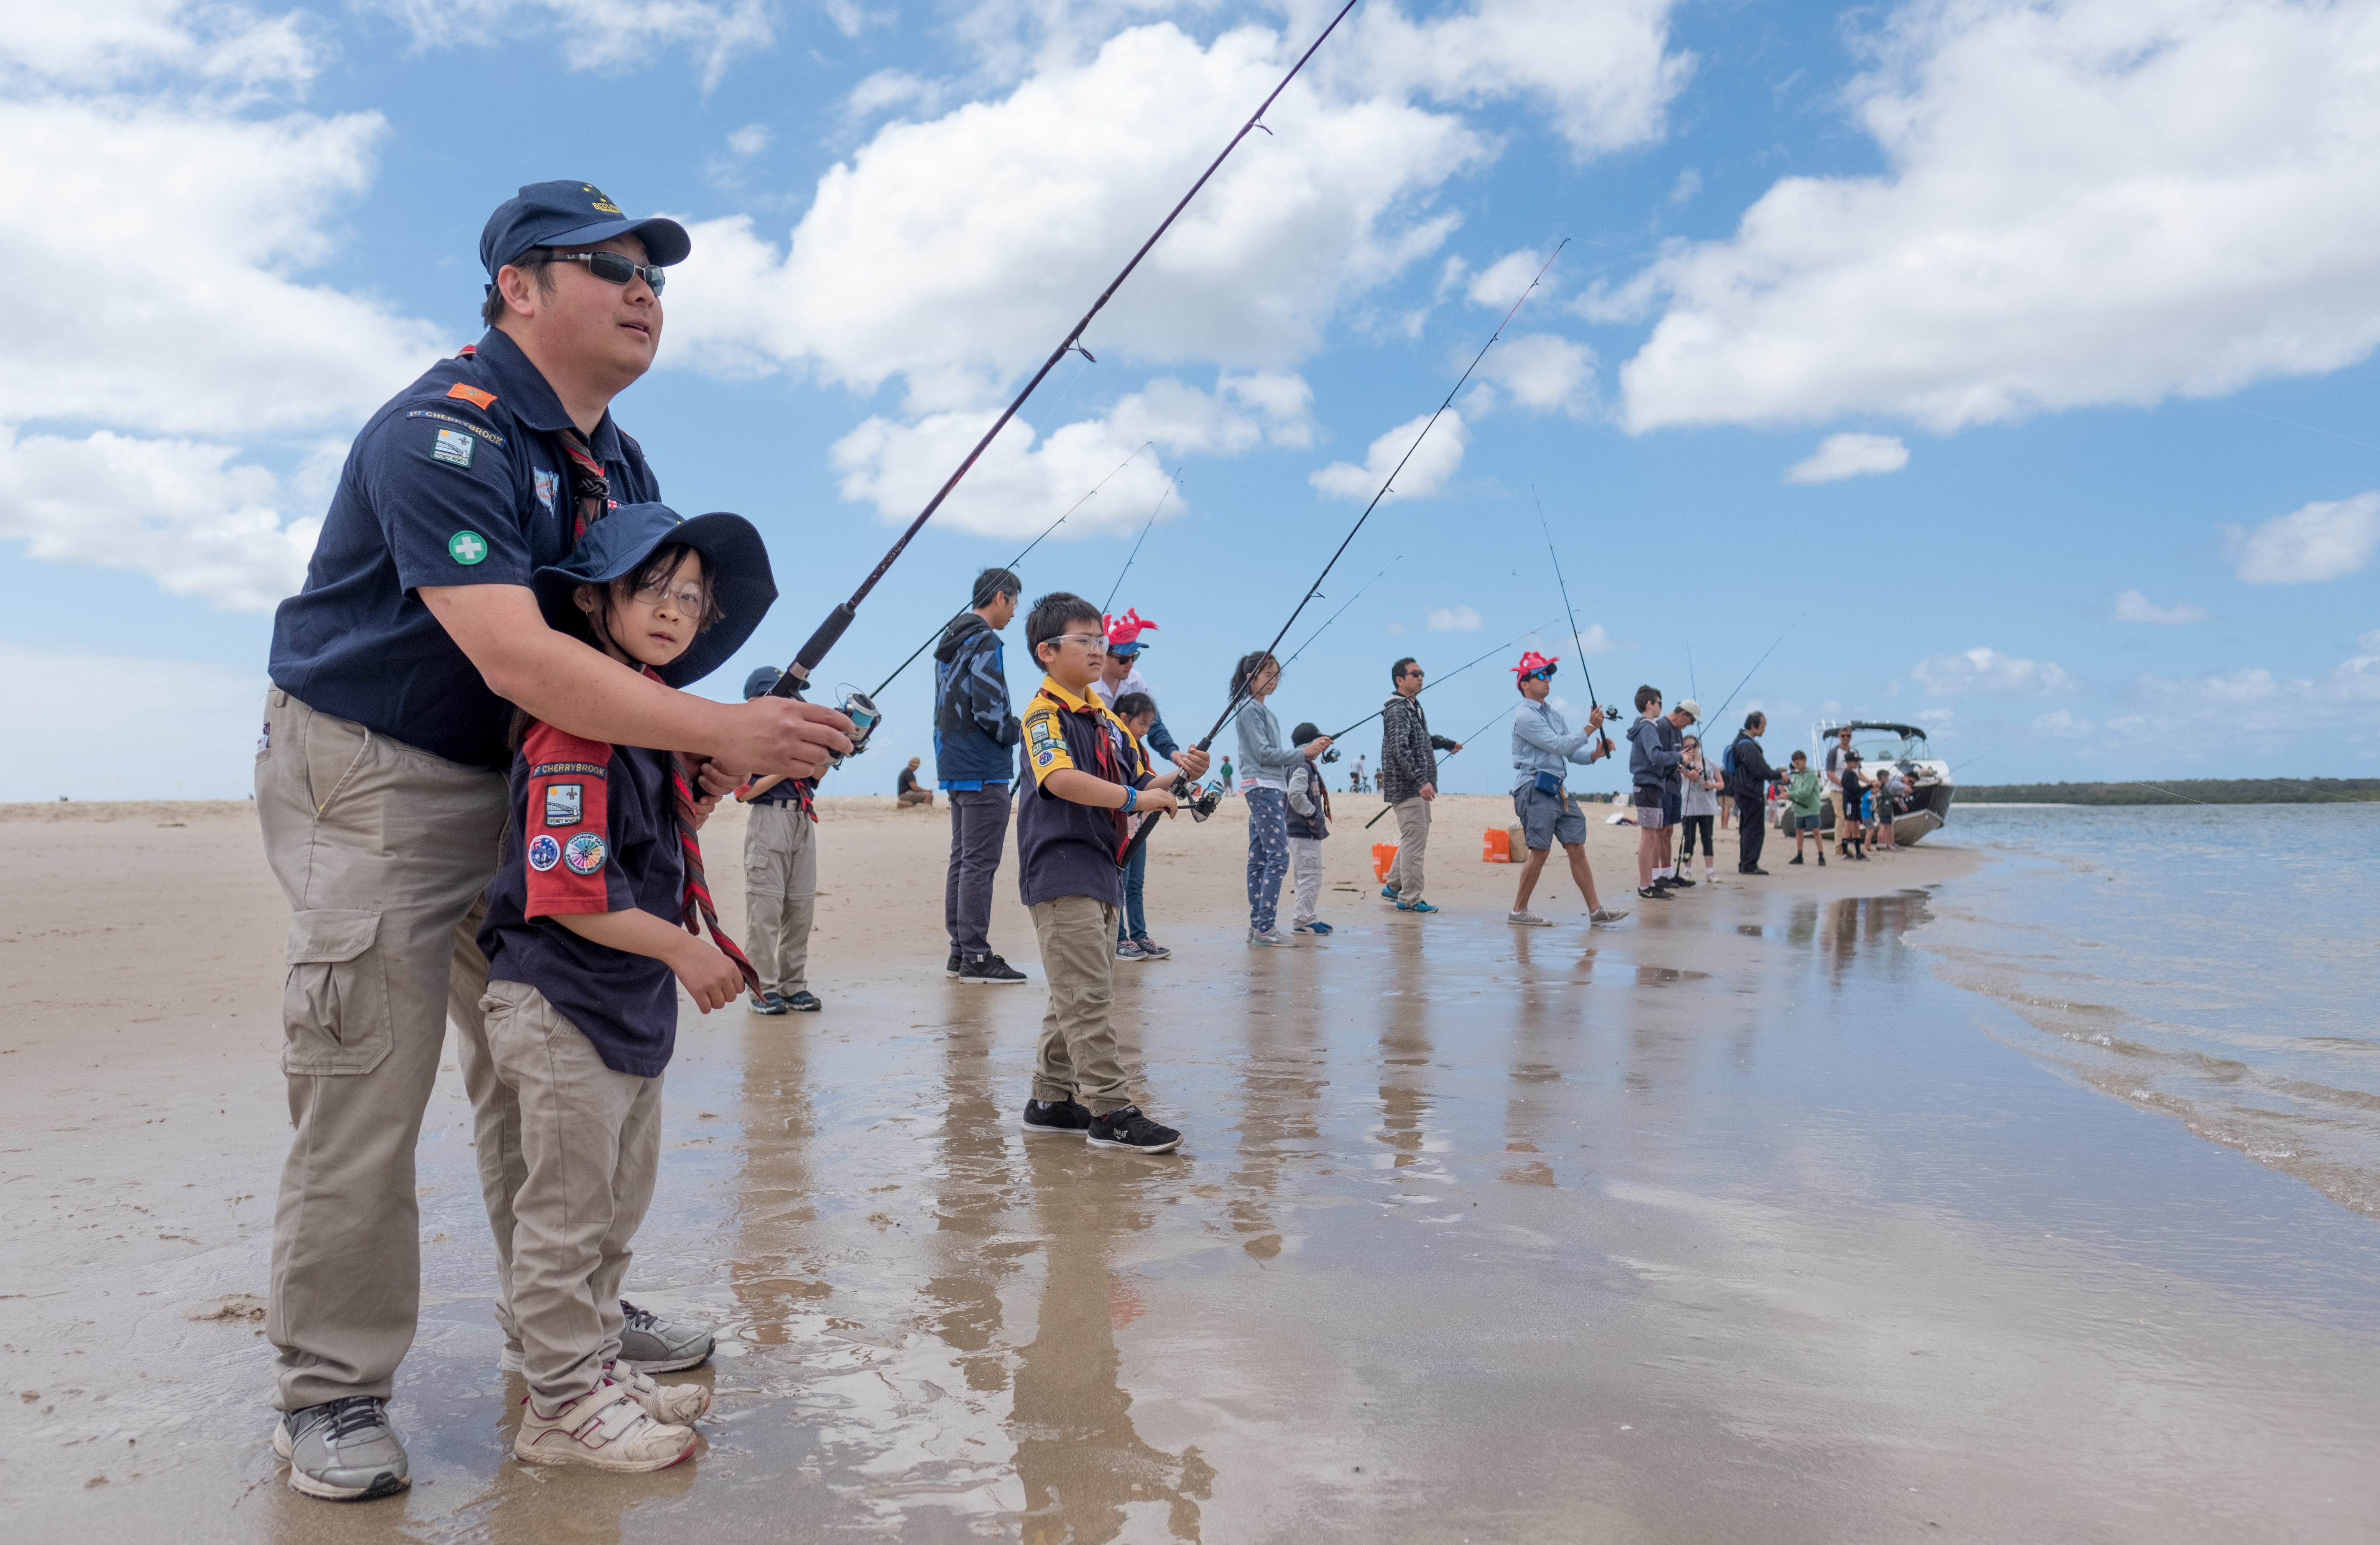 young fishers beach fishing at Gone Fishing Day, please credit NSW DPI